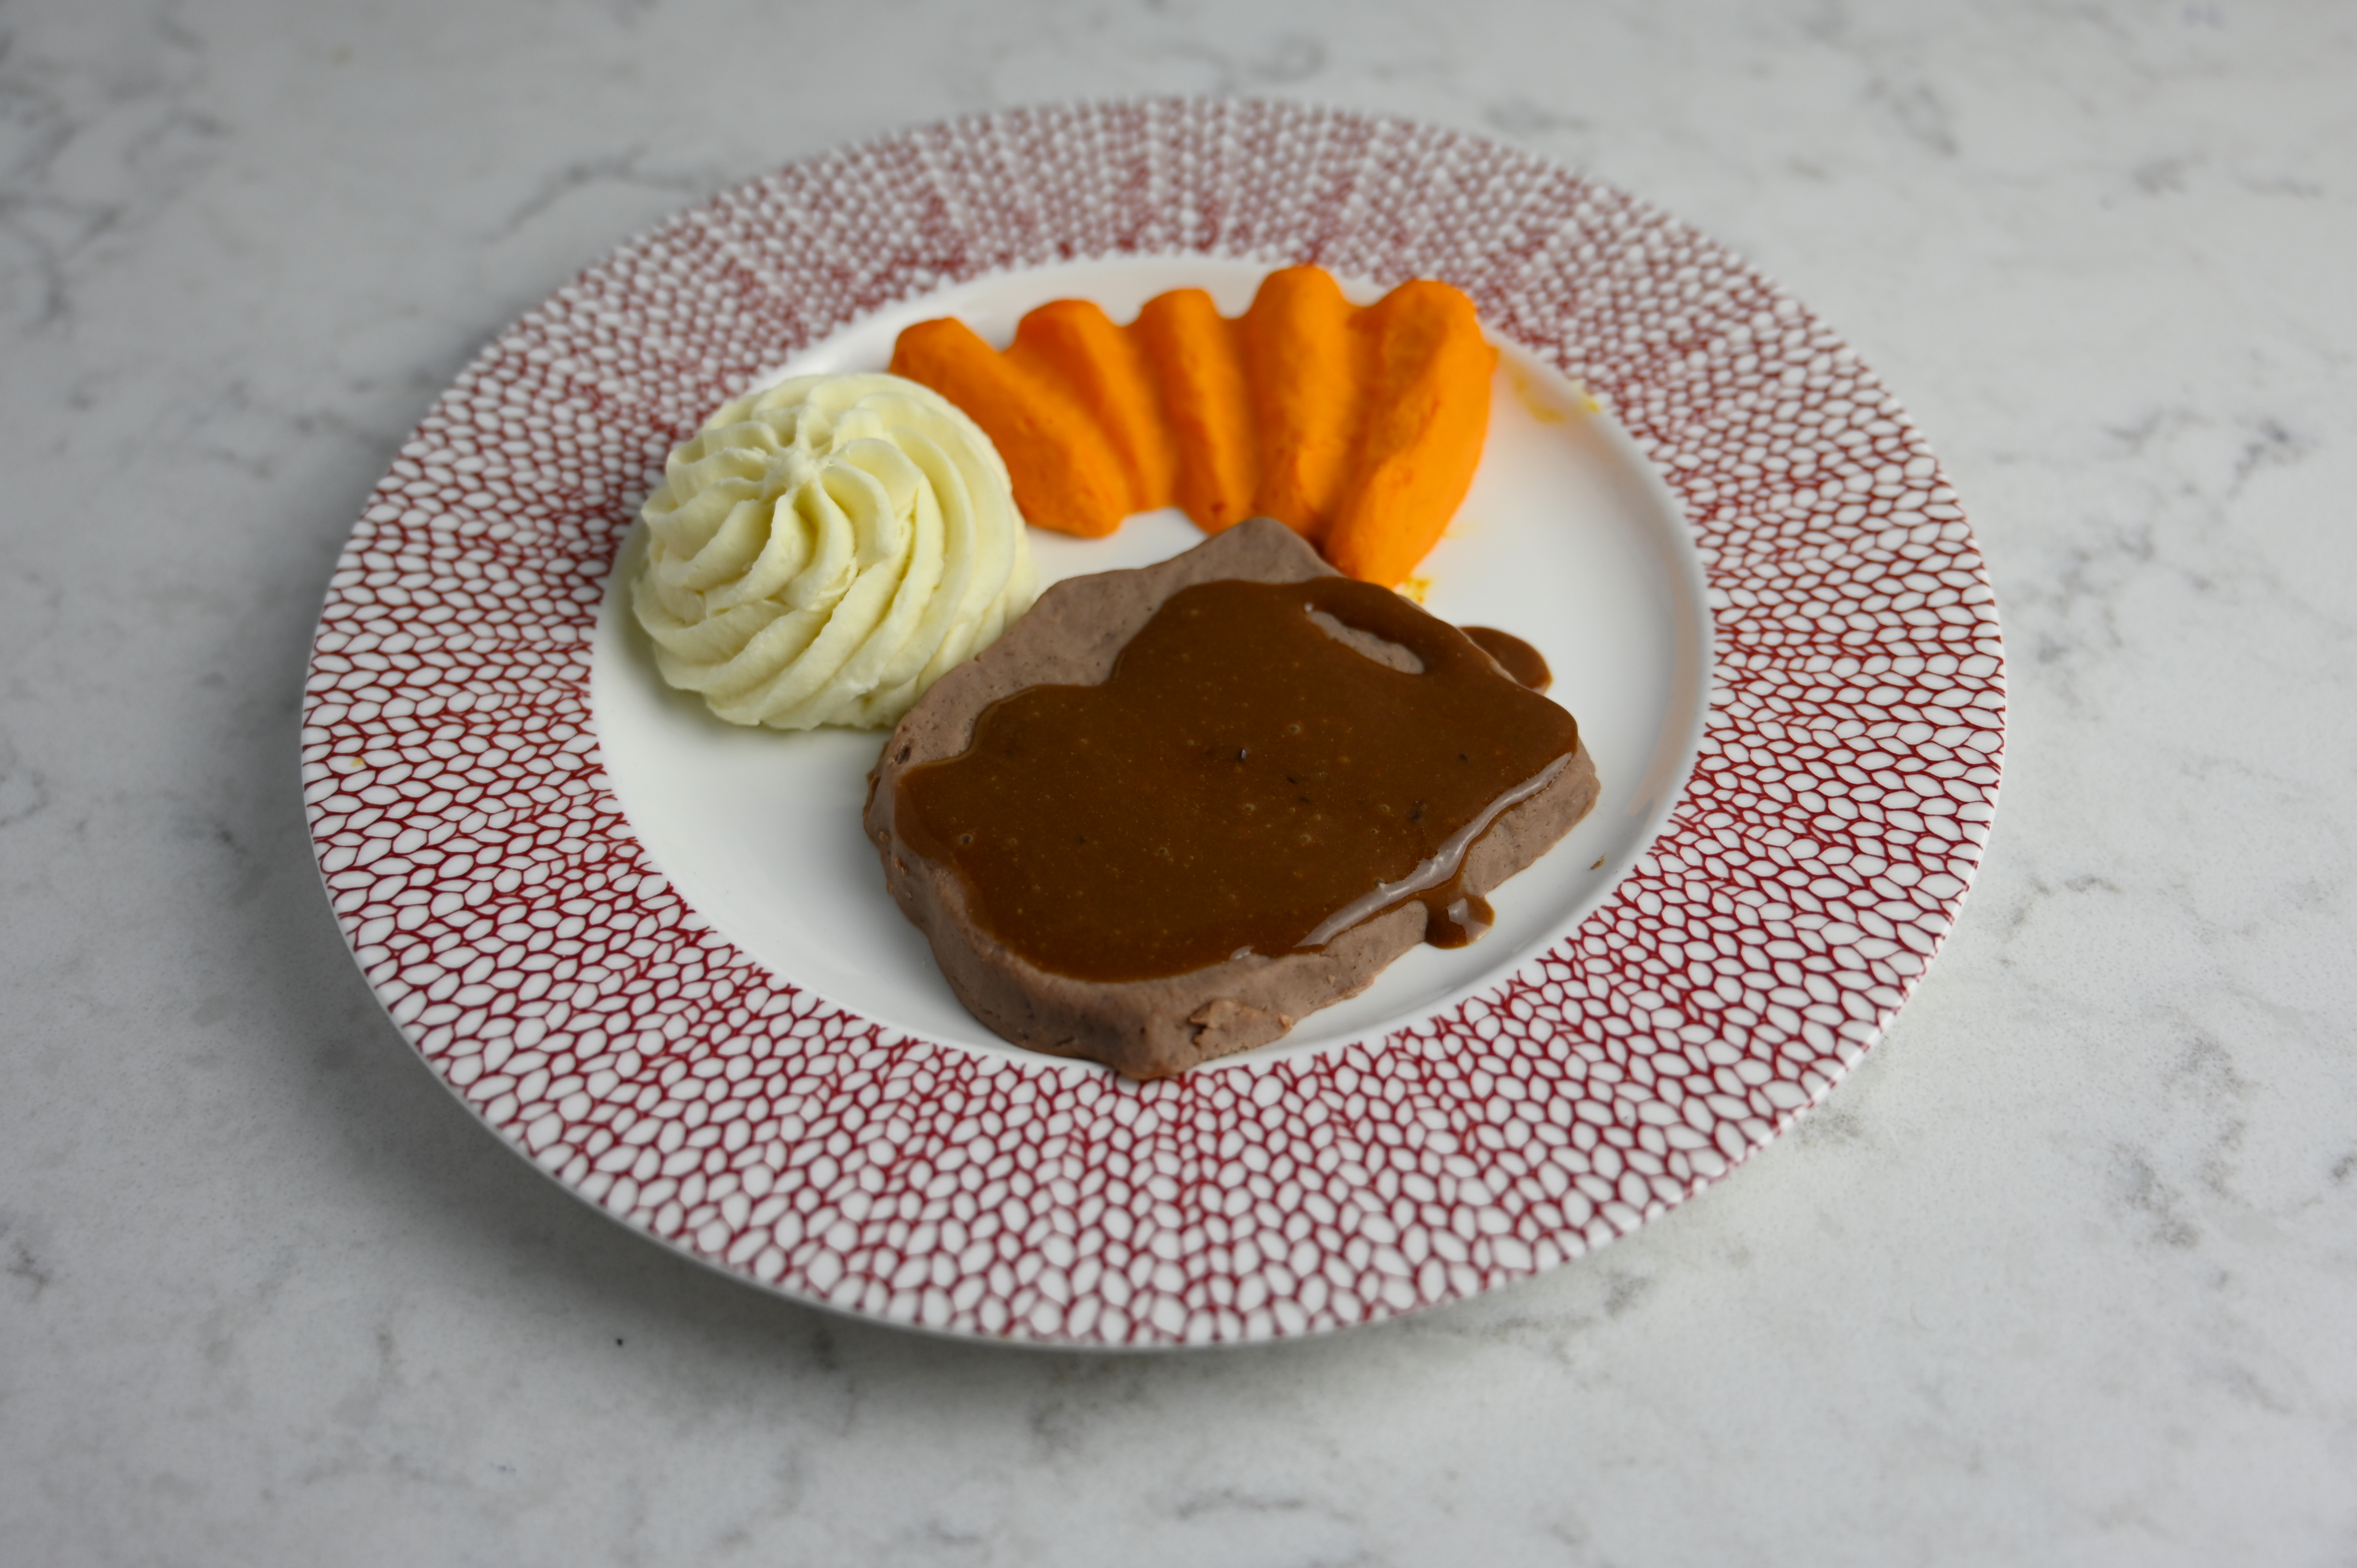 Steak carrots and mashed potatoes all pureed